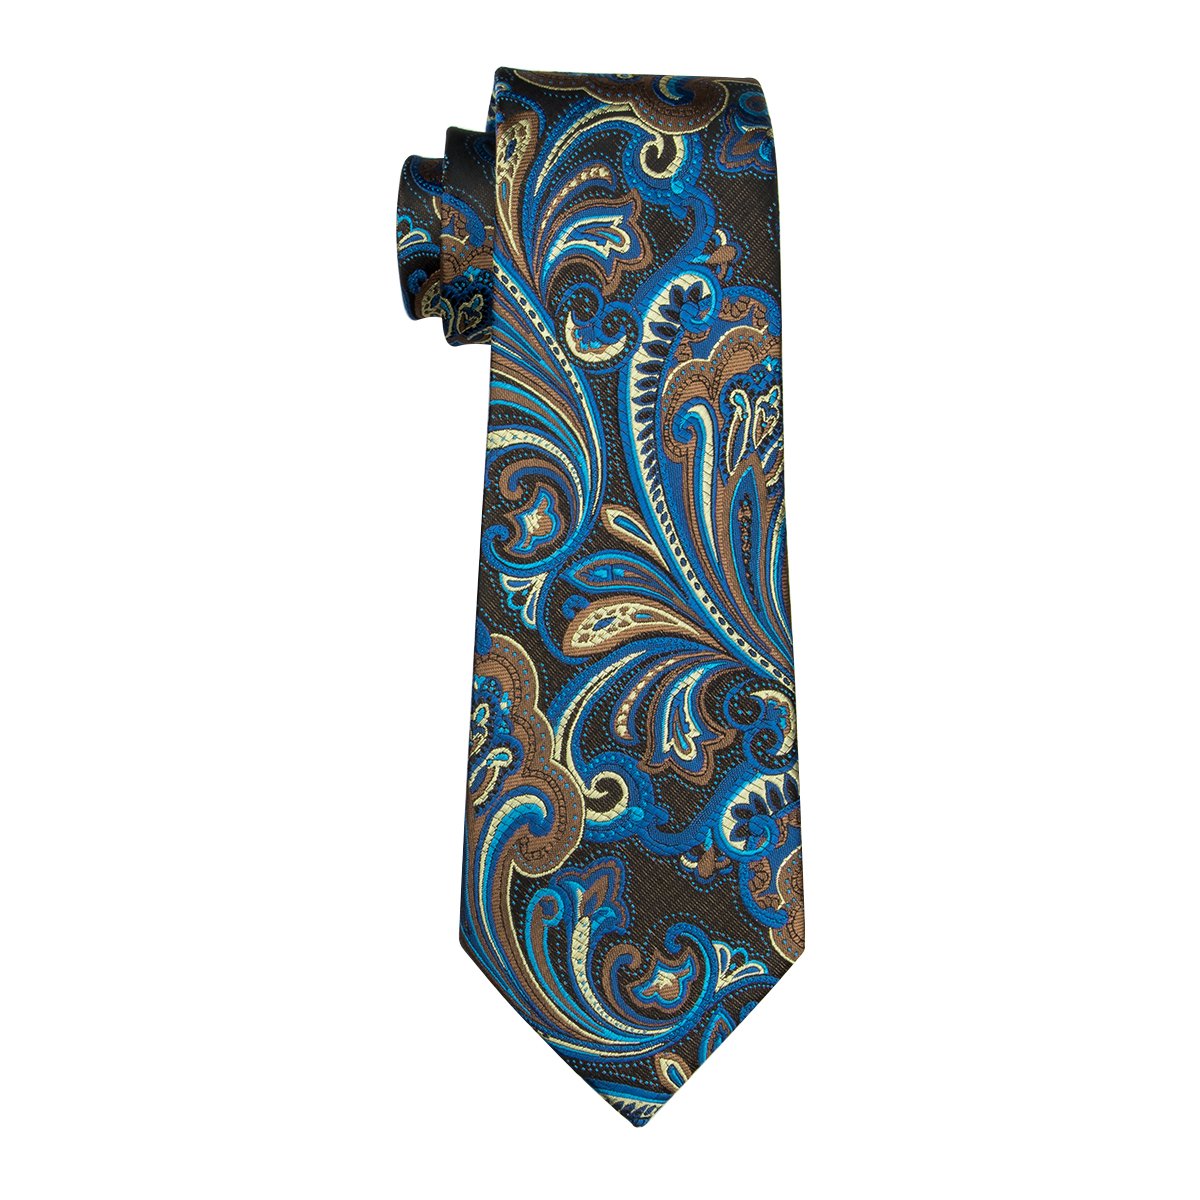 Brown Blue Floral Tie Pocket Square Cufflinks Set - barry-wang